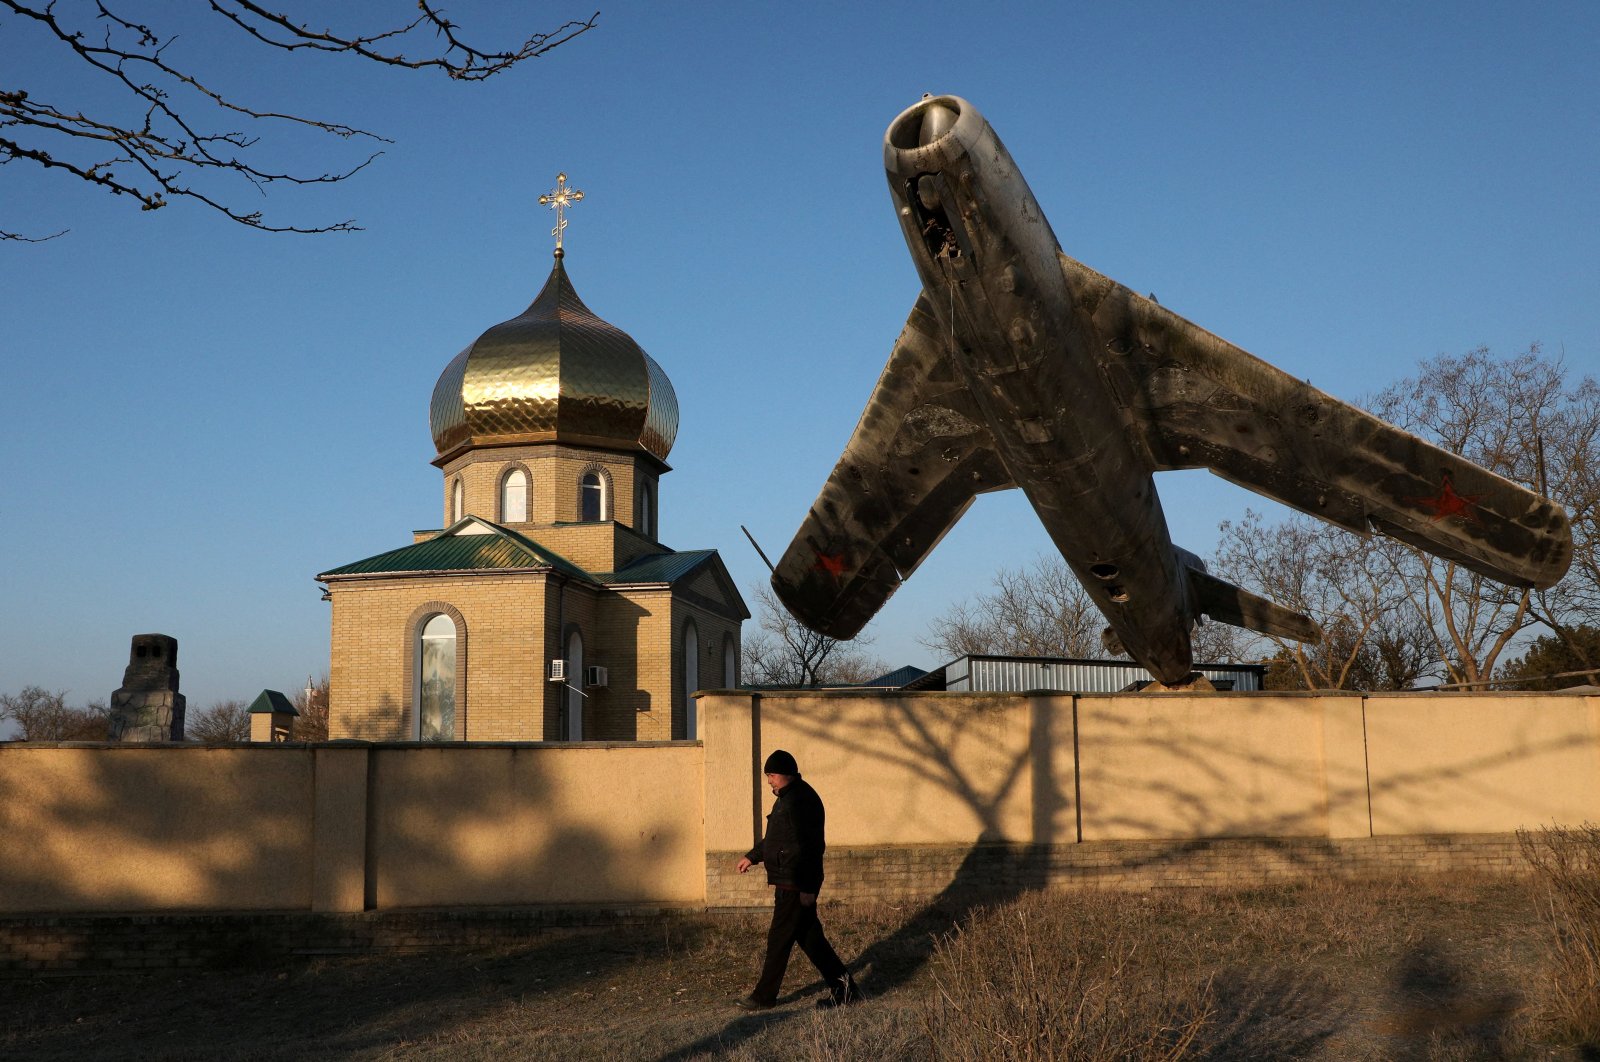 A man walks past a monument to a Soviet MiG-17 fighter aircraft installed next to a church in the village of Okhotnykove, Crimea March 2, 2023. (Reuters File Photo)